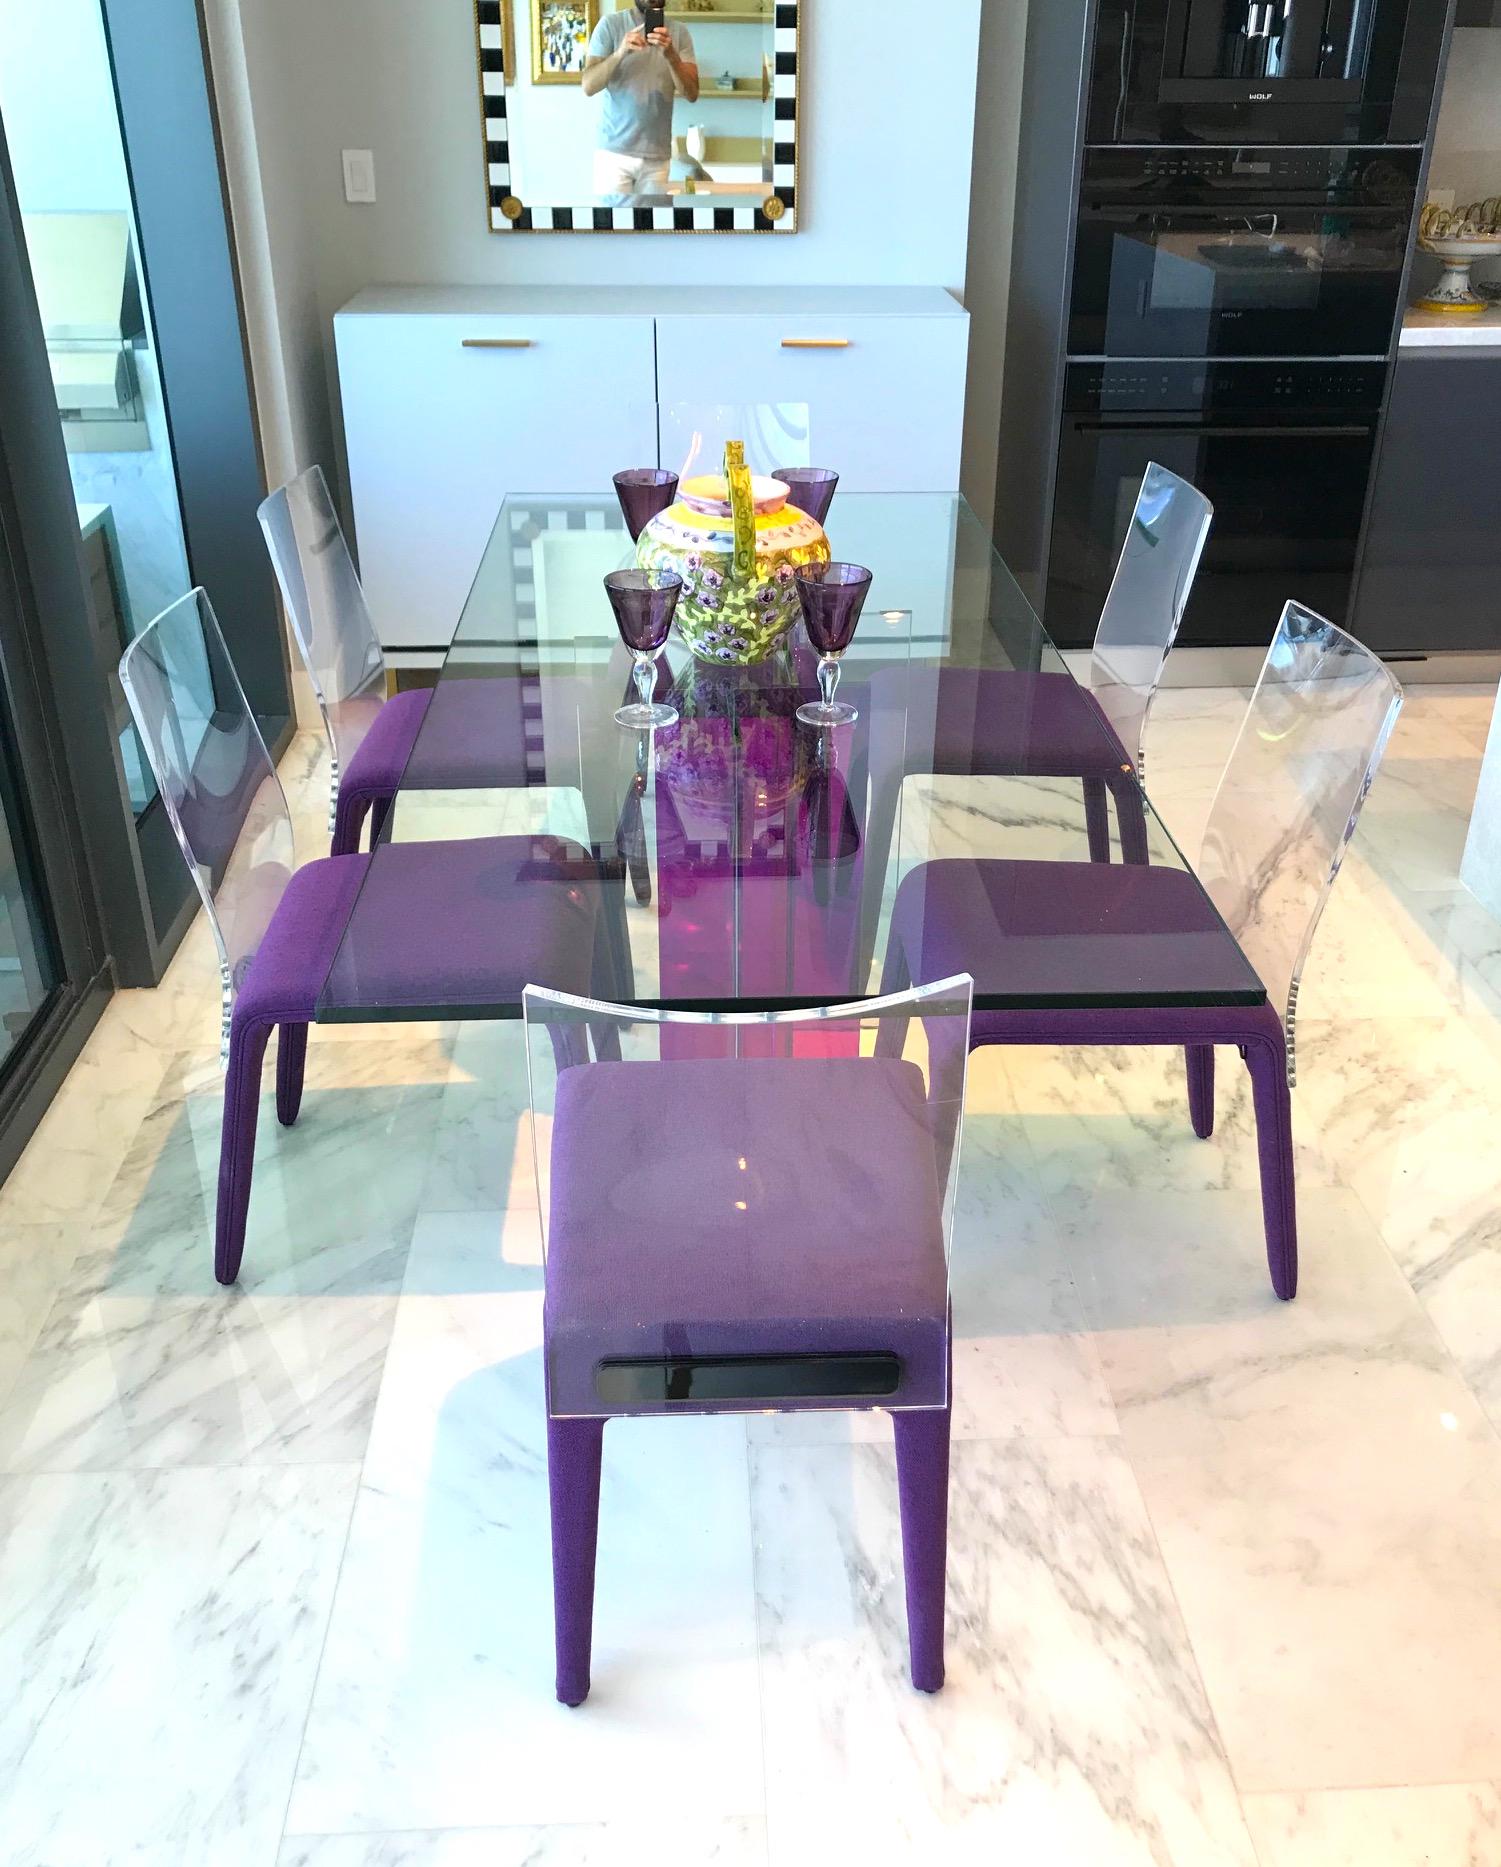 Altuglass Dining Chairs In Purple Wool, Purple Dining Room Table